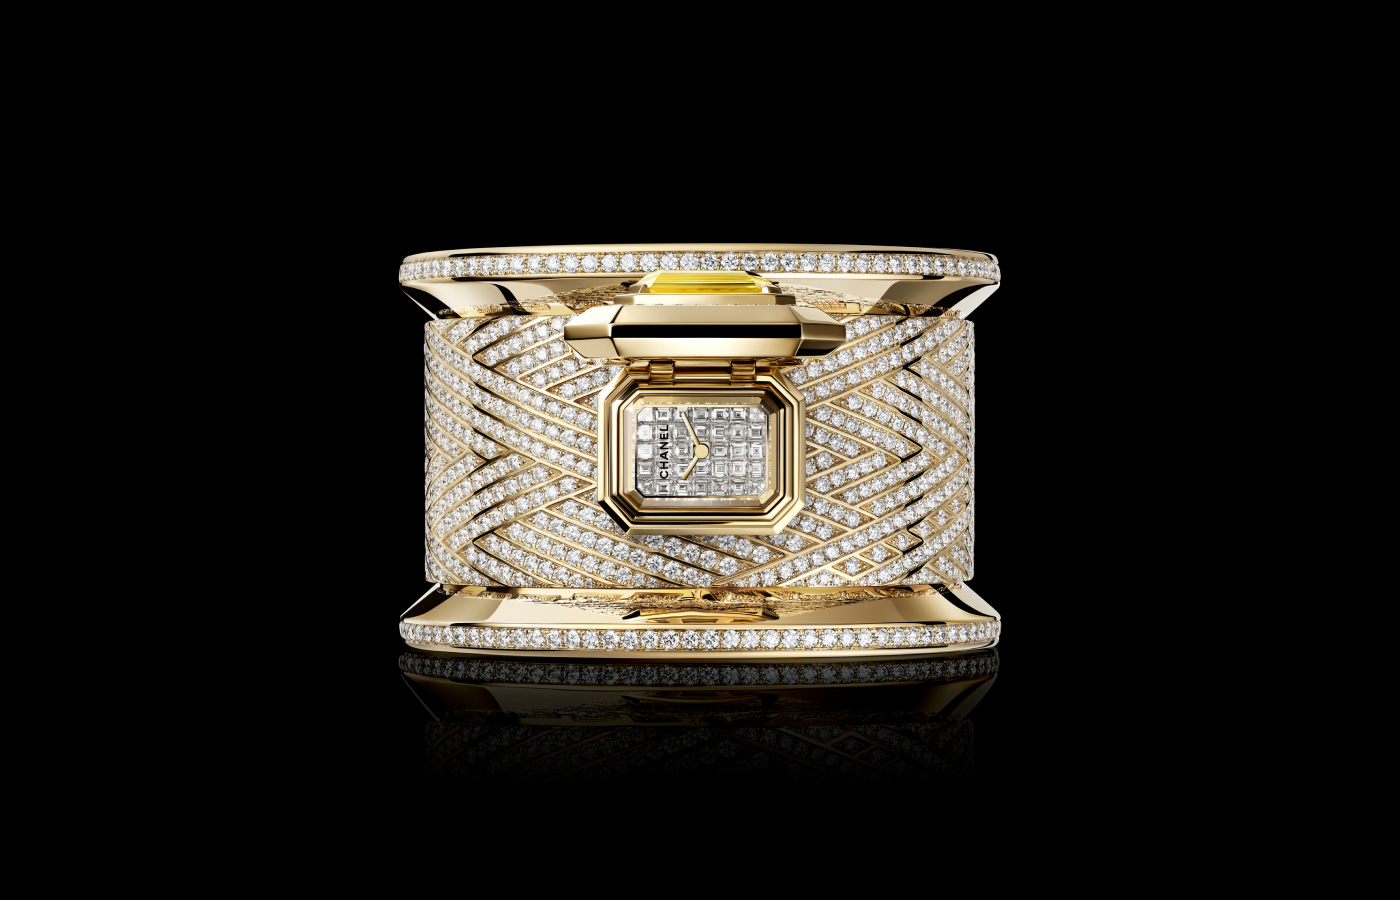 Chanel Bobbin Cuff Couture watch in gold and diamond set with a 17.51-ct yellow emerald-cut sapphire from the Couture O'Clock capsule collection